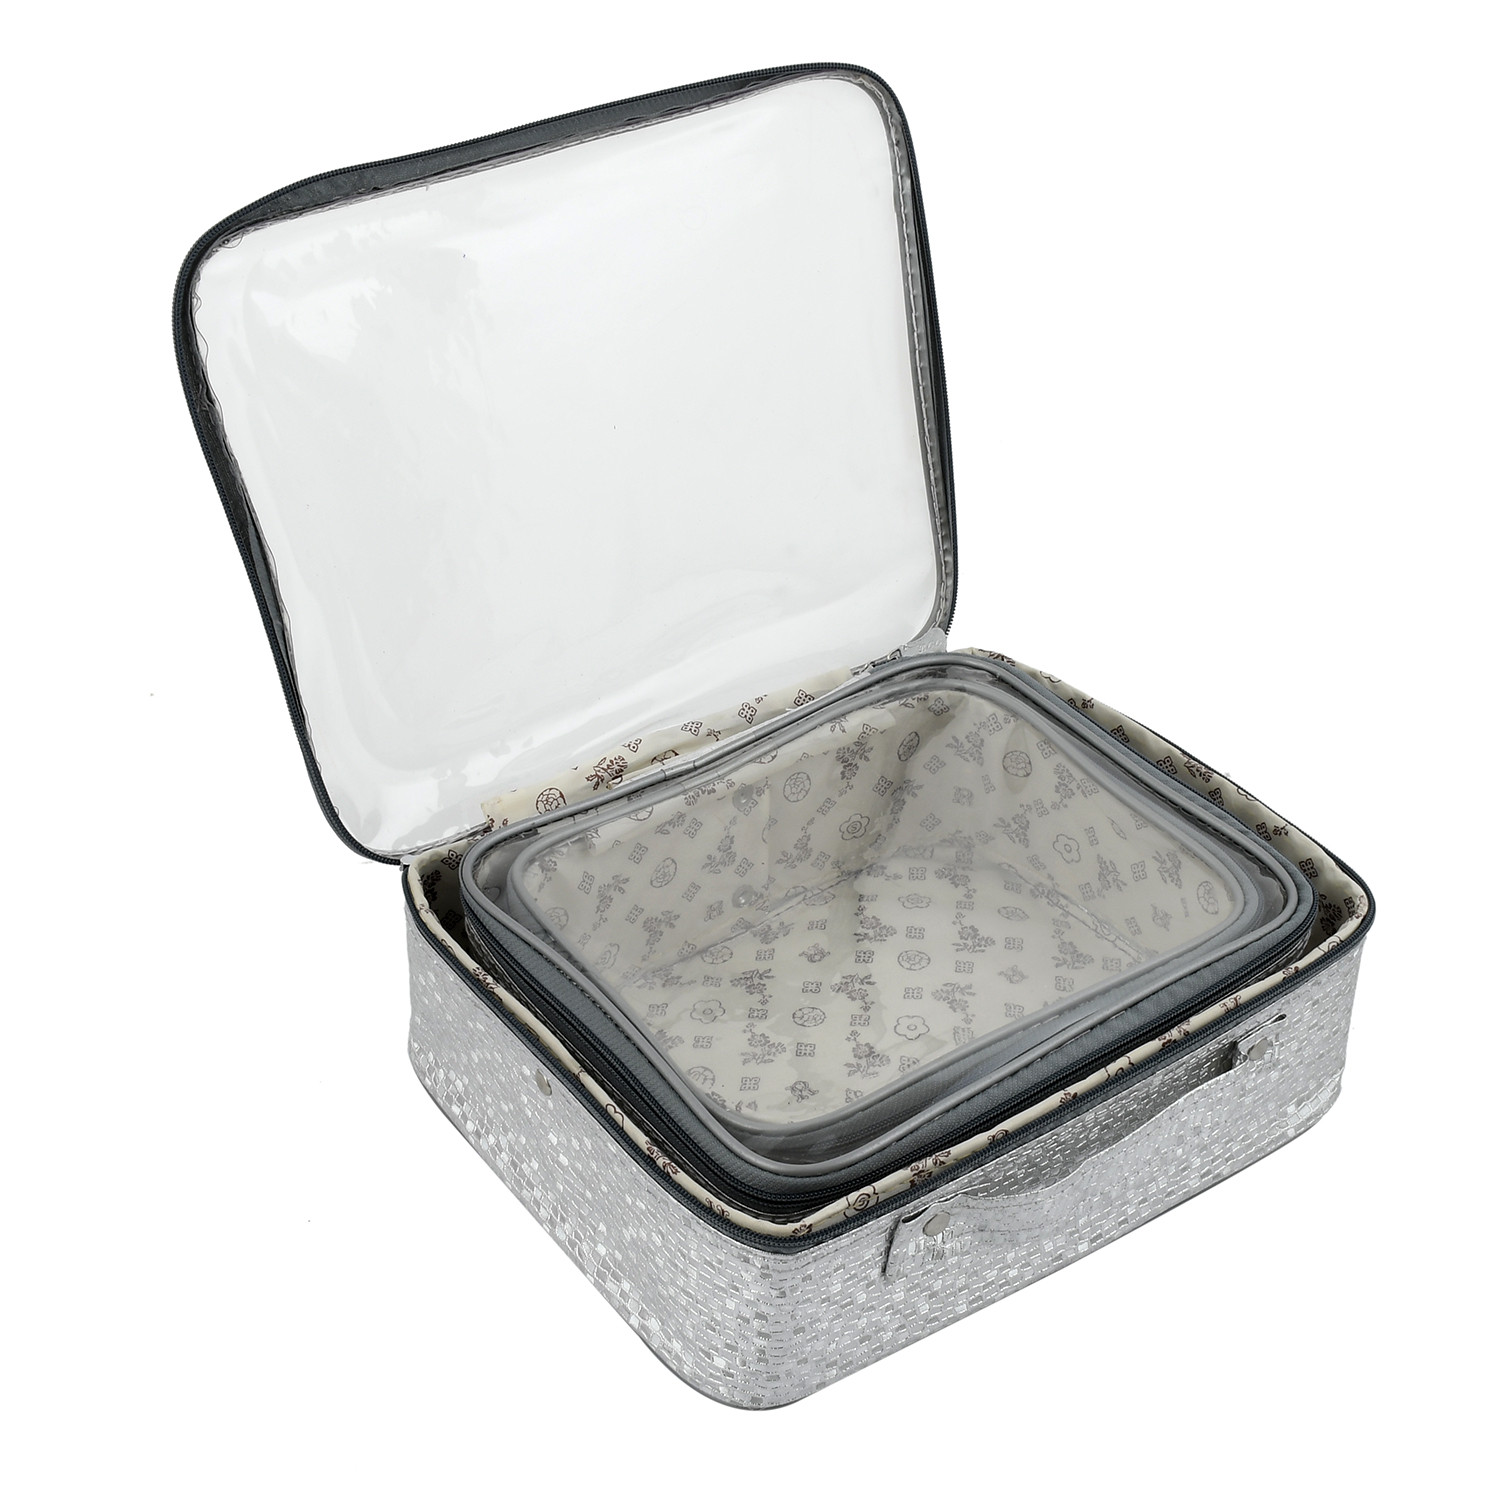 Kuber Industries Square Design Rexine 3 Pieces Make Up Jewellery Vanity Travelling Cosmetic Multipurpose Box (Silver), Collection -CTKTC38179